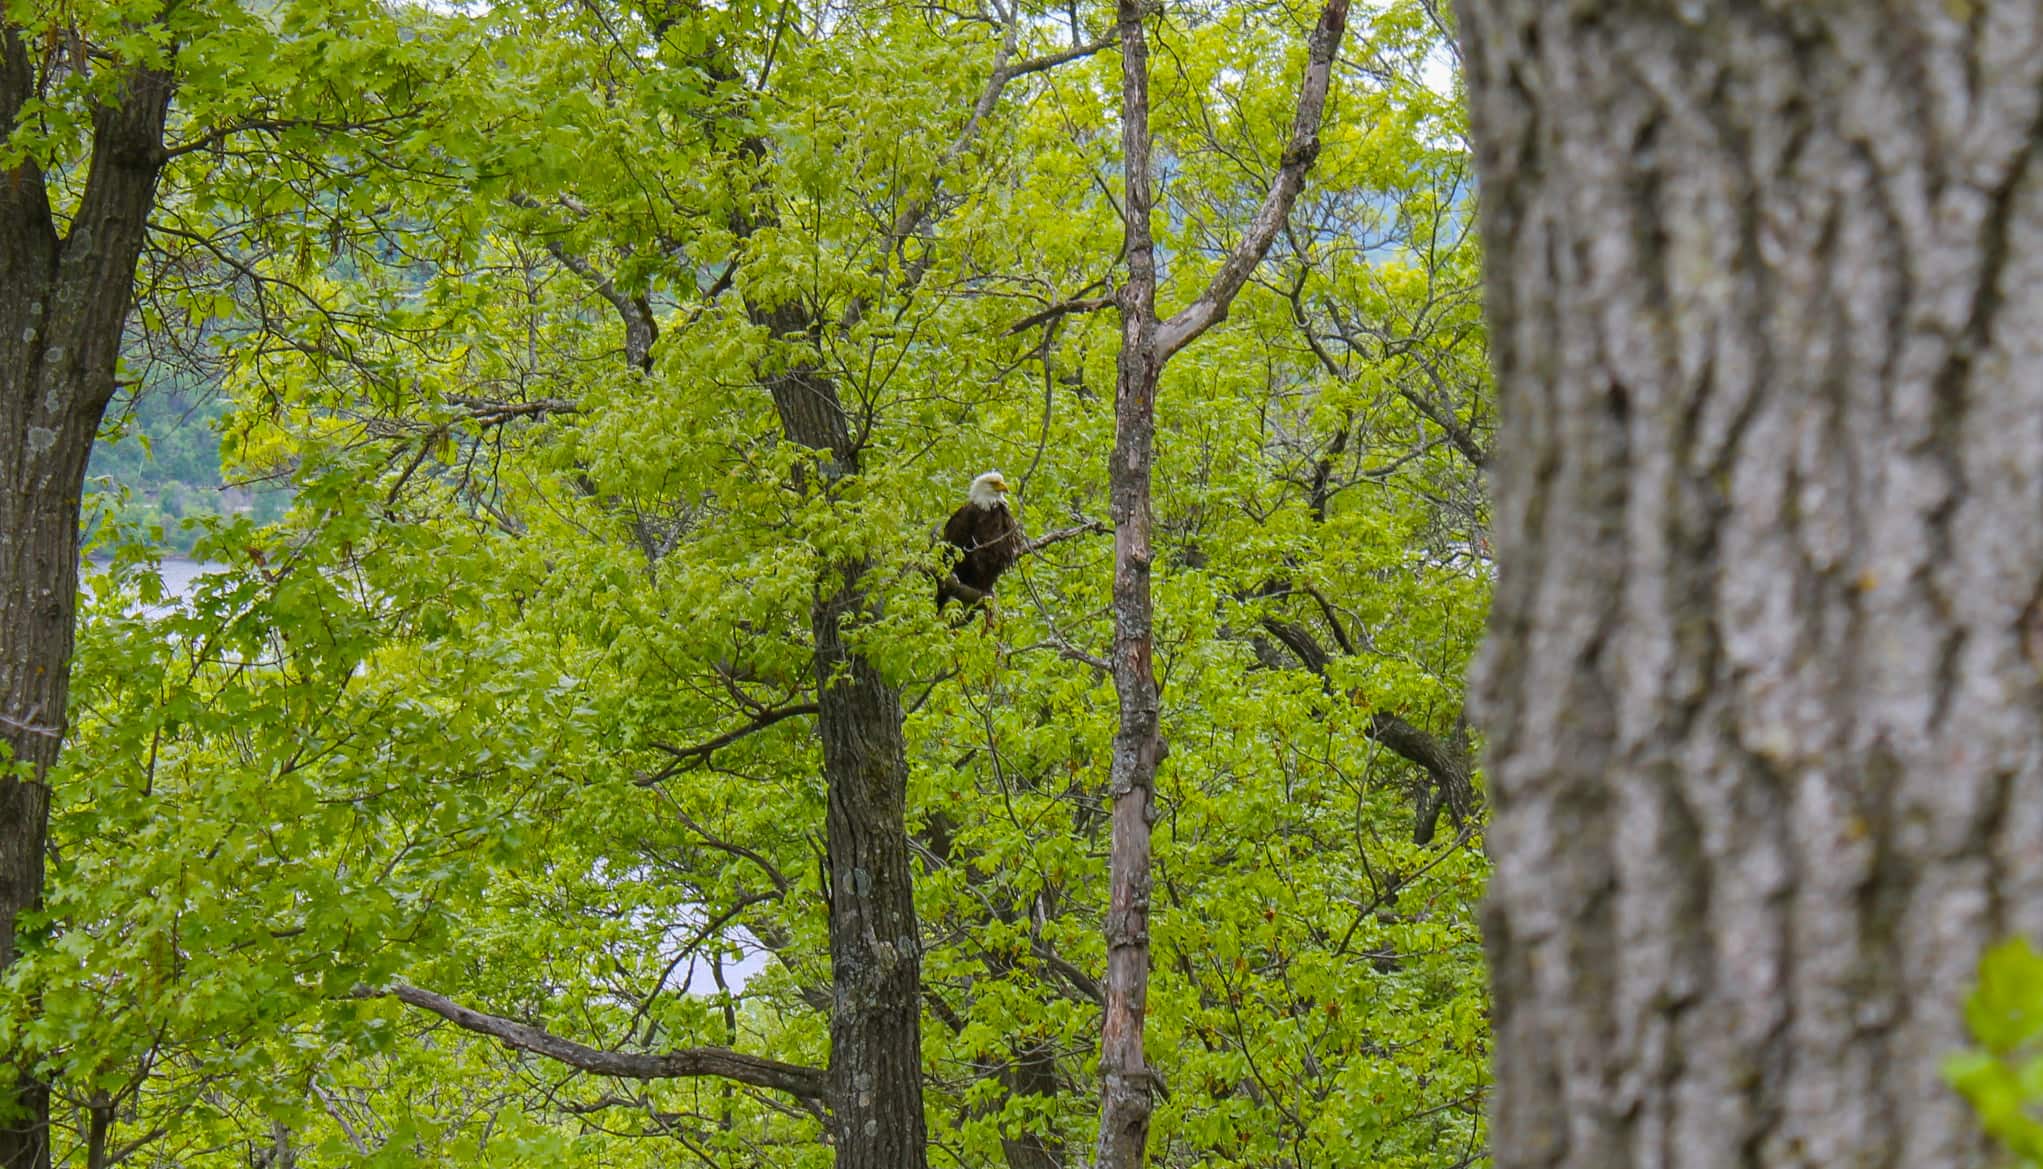 A bald eagle rests on a tree at Perrot Ridge